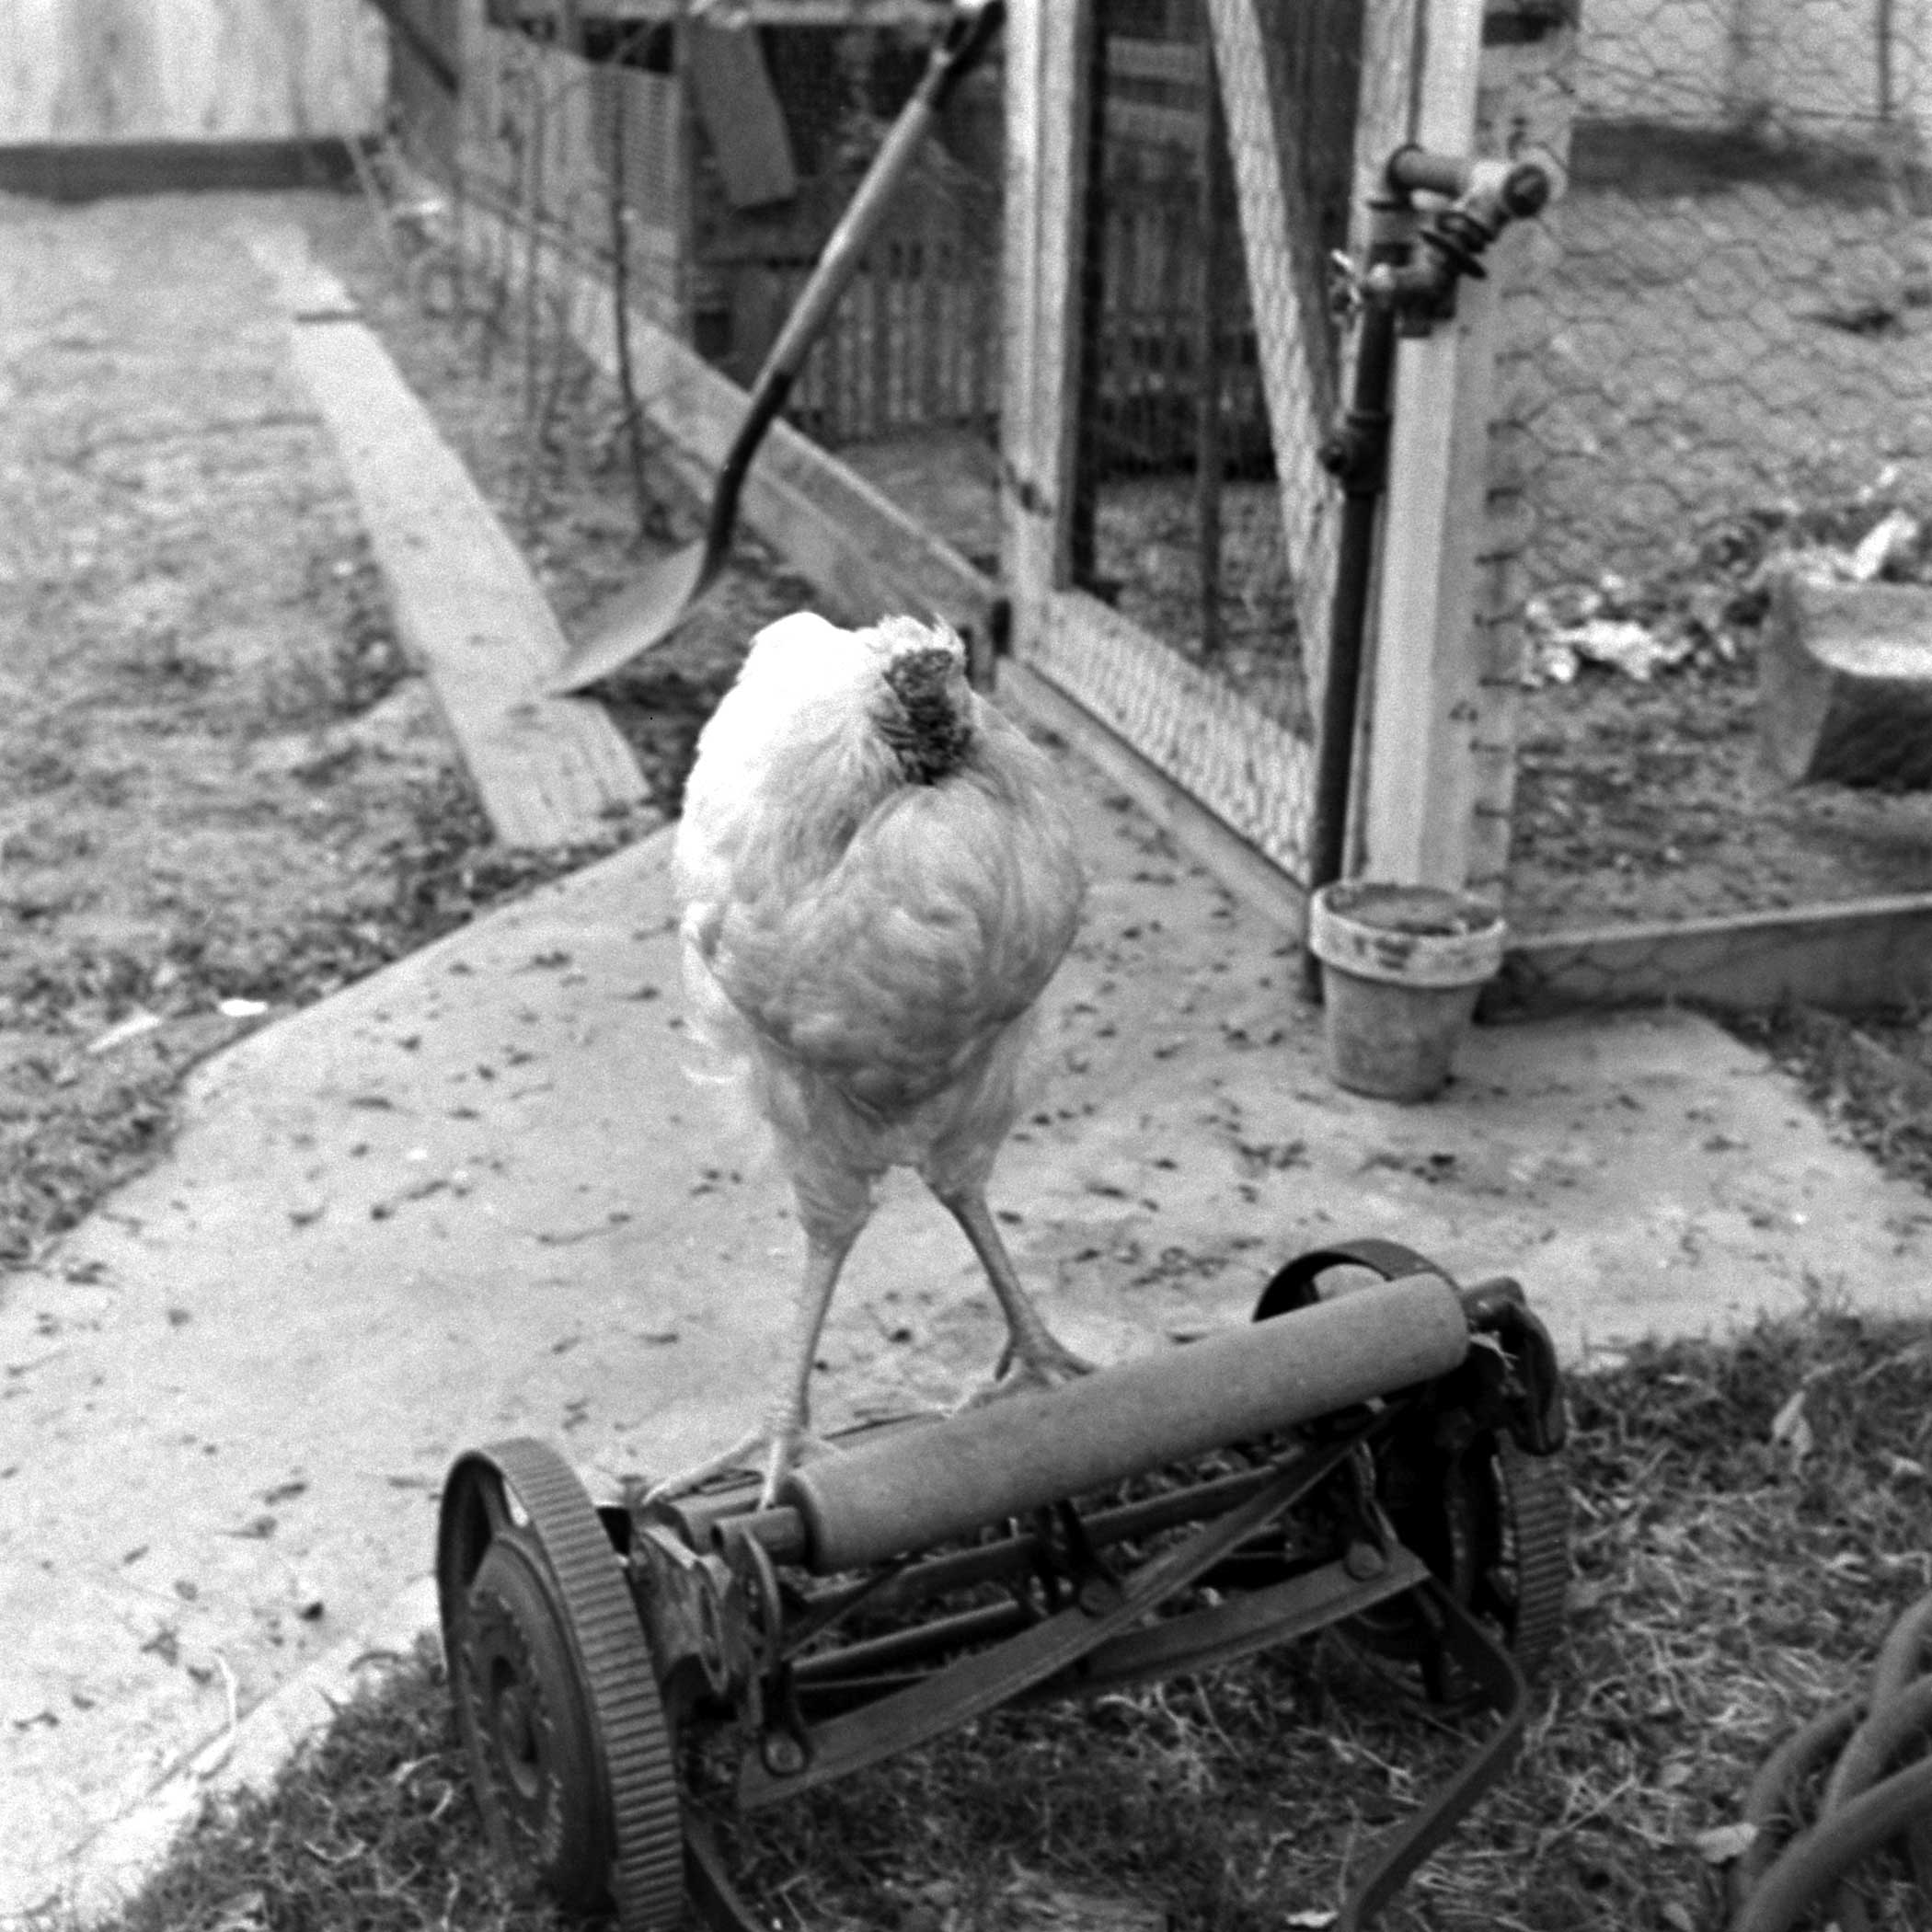 Mike the headless chicken stands atop a lawn mower in Fruita, Colorado, 1945.